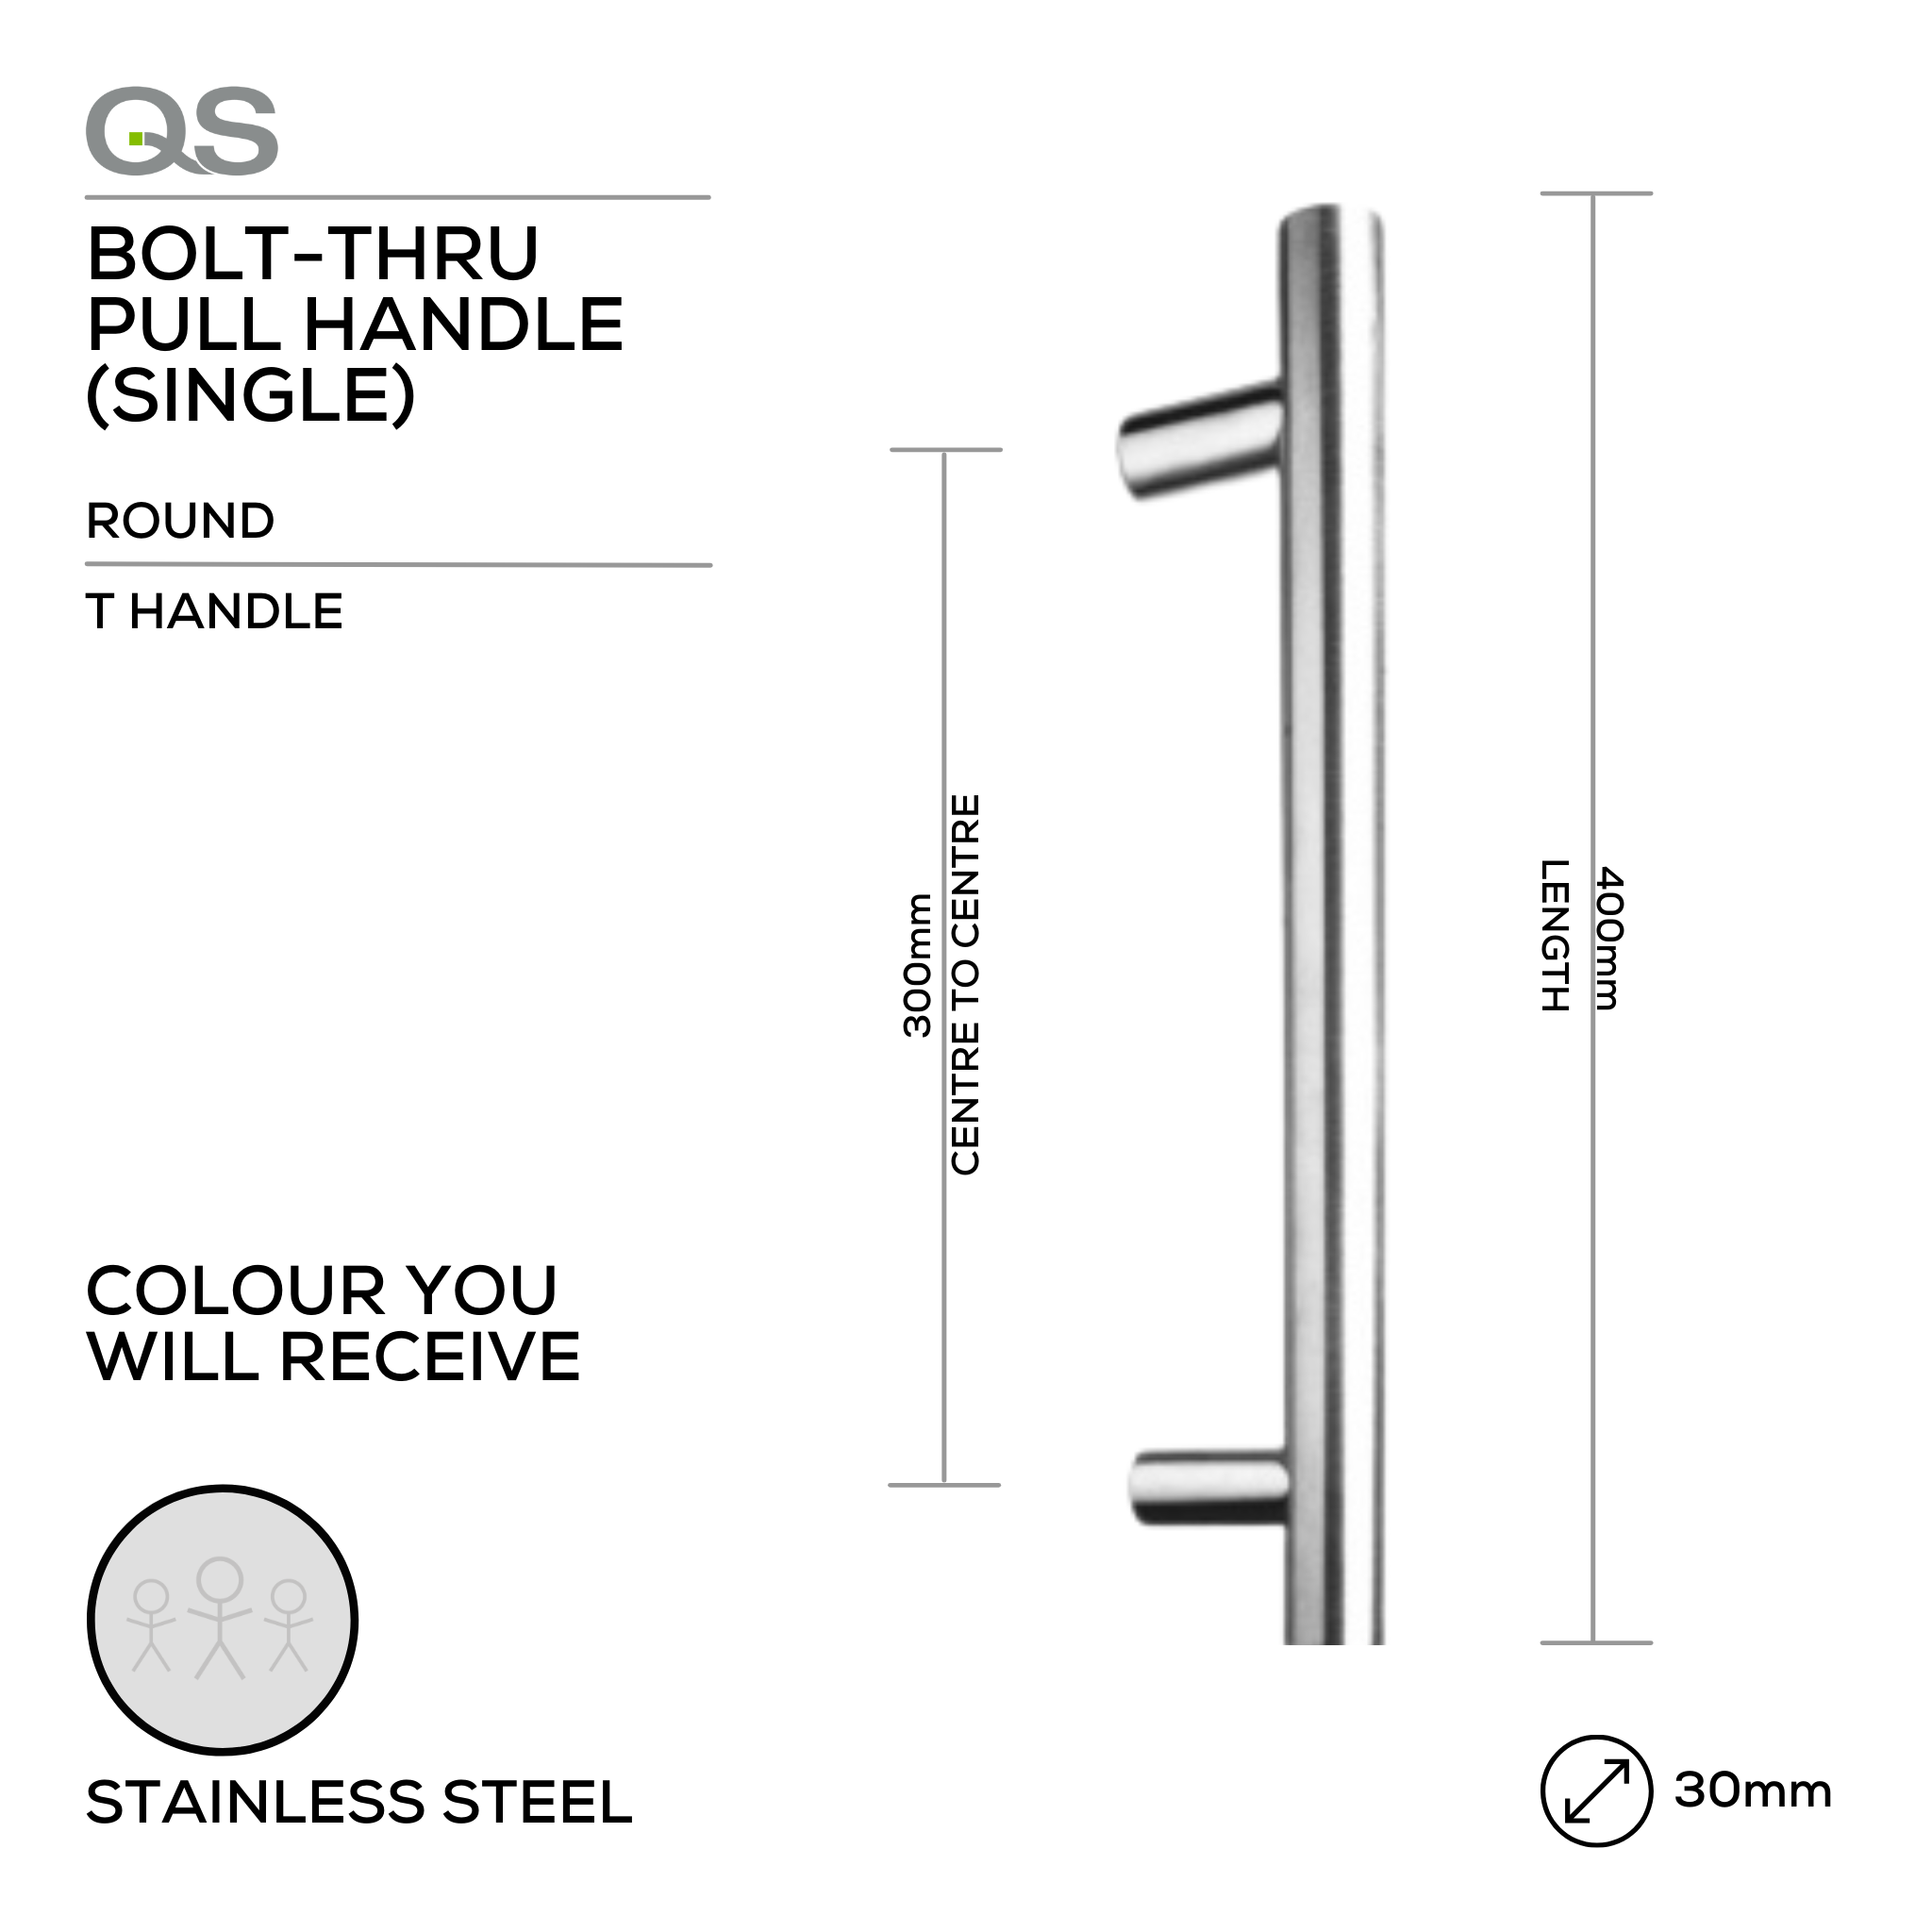 QS2507/1 T Handle, Pull Handle, Round, T Handle, BoltThru, 30mm (Ø) x 400mm (l) x 300mm (ctc), Stainless Steel, QS